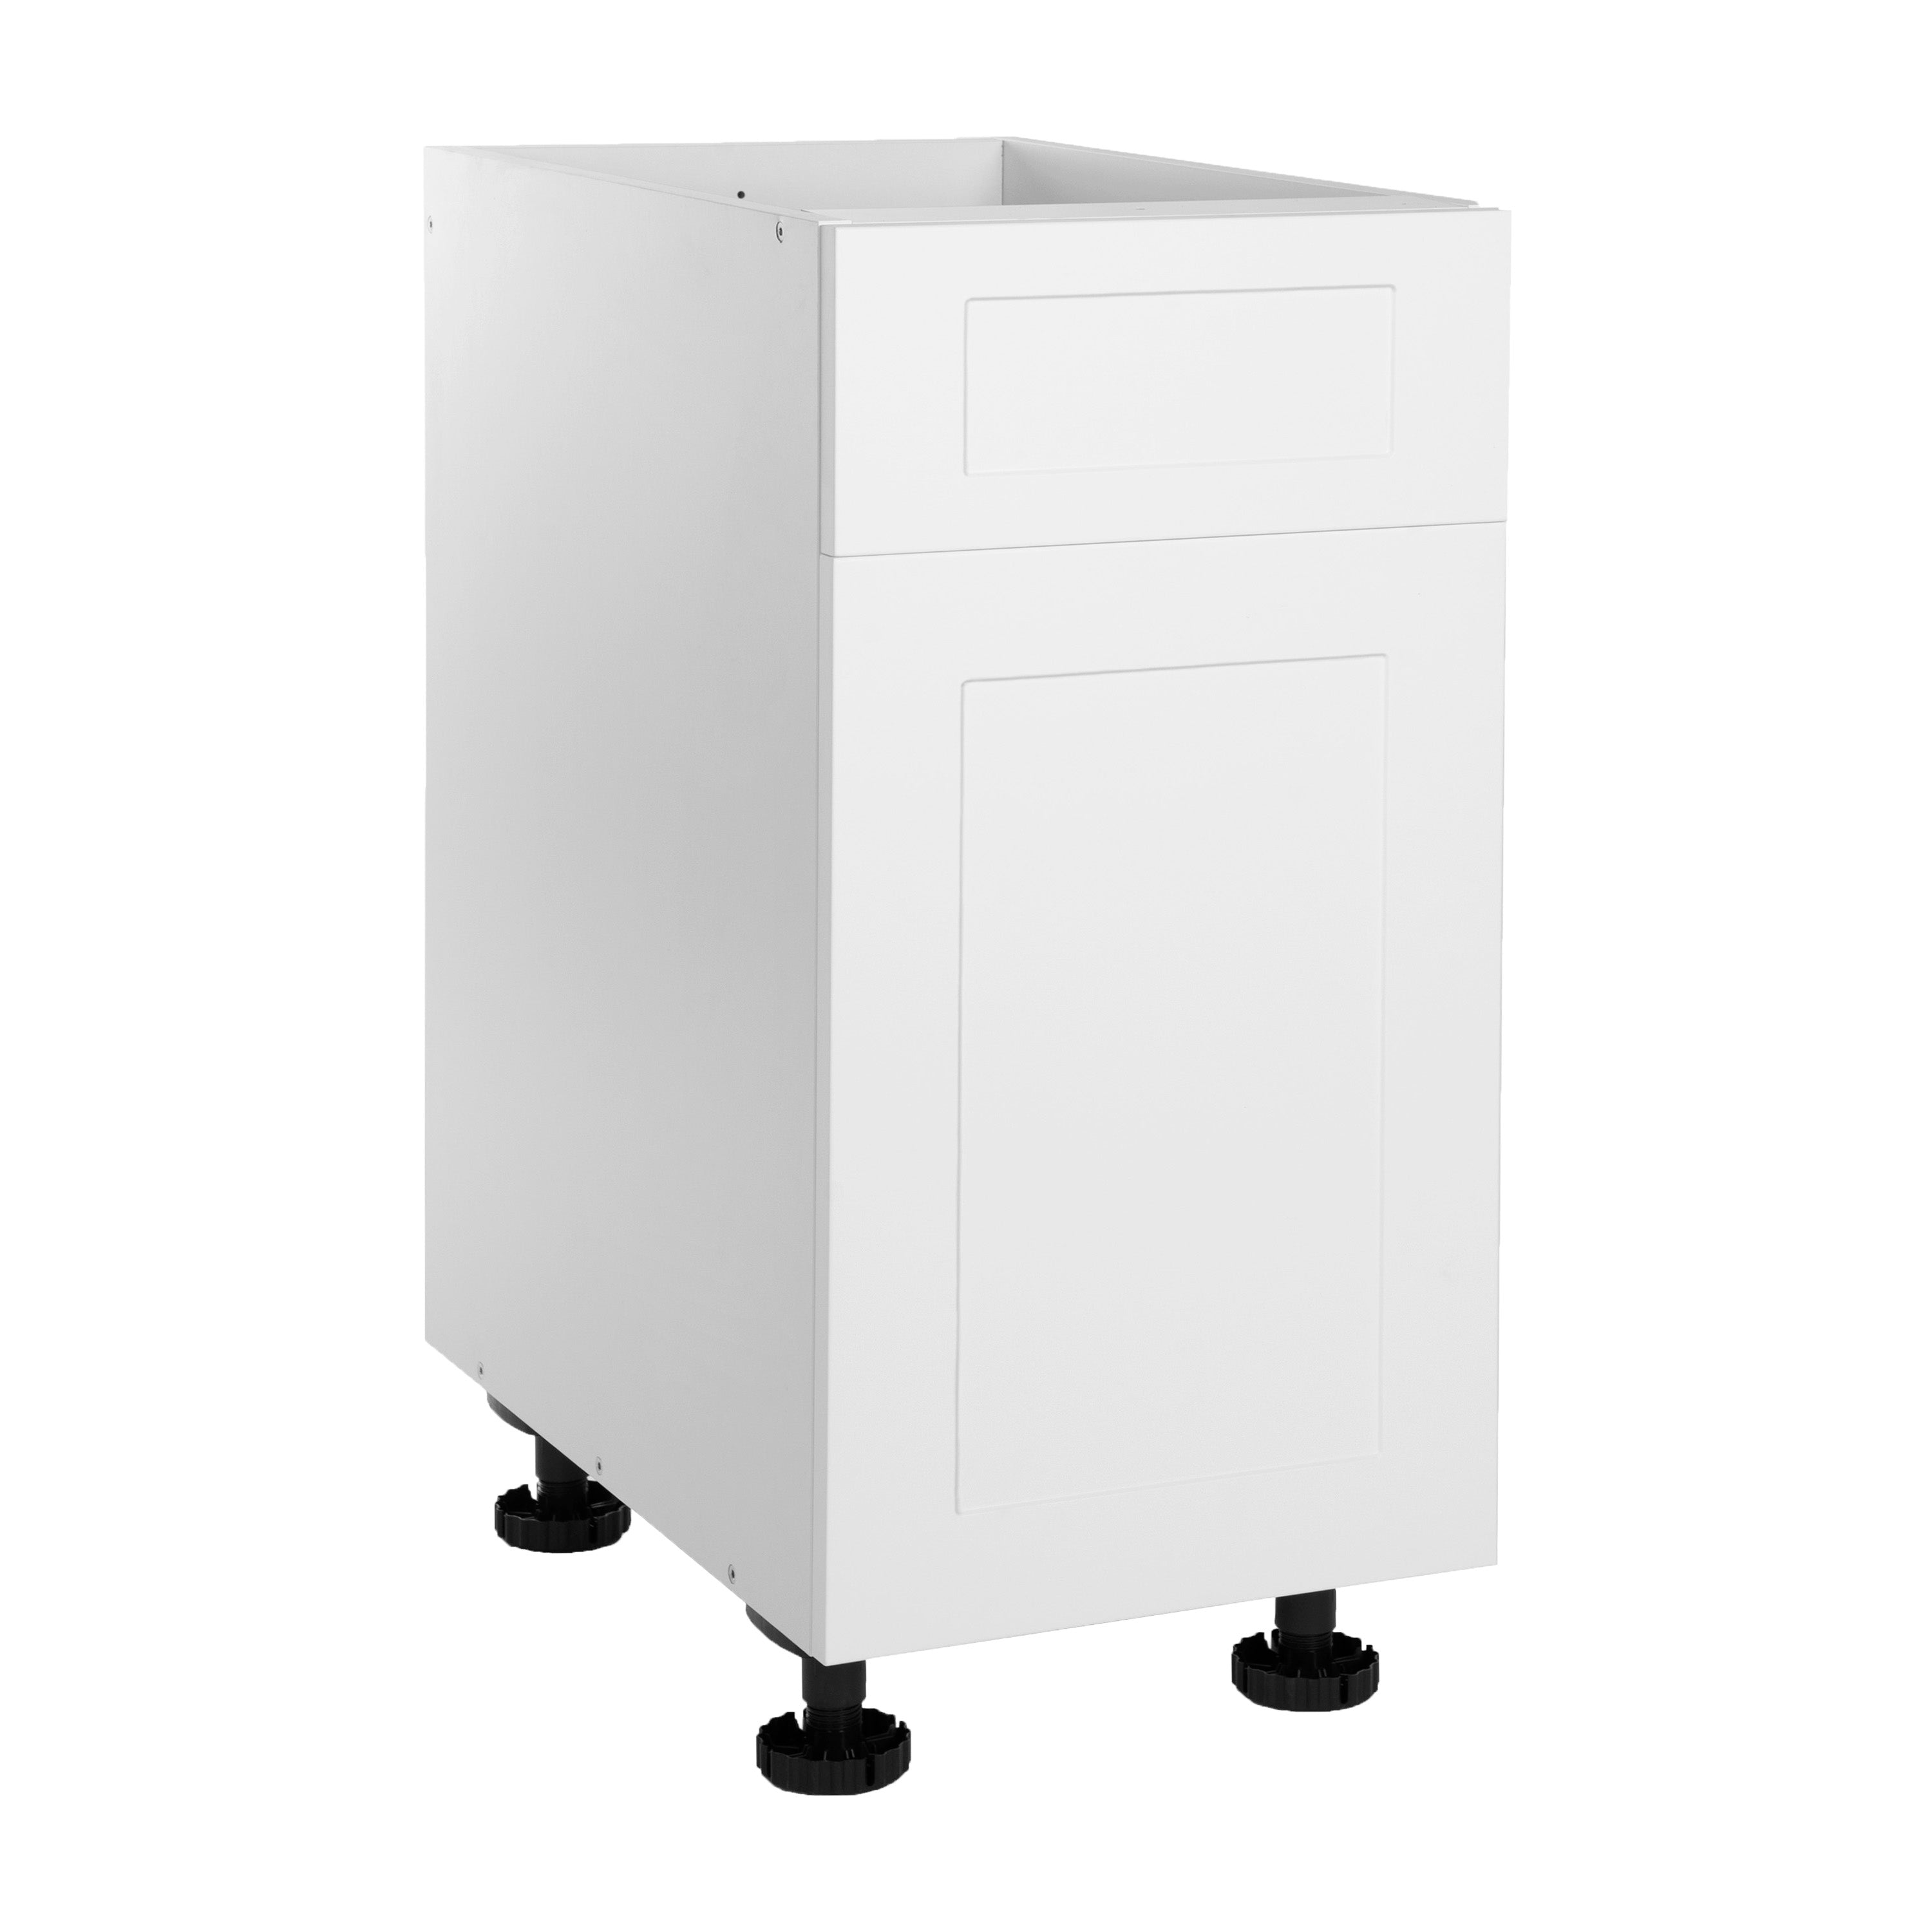 Quick Assemble Modern Style with Soft Close, White Shaker Base Kitchen Cabinet 1 Drawer (18 in W x 24 in D x 34.50 in H) -  Pro-Edge HD